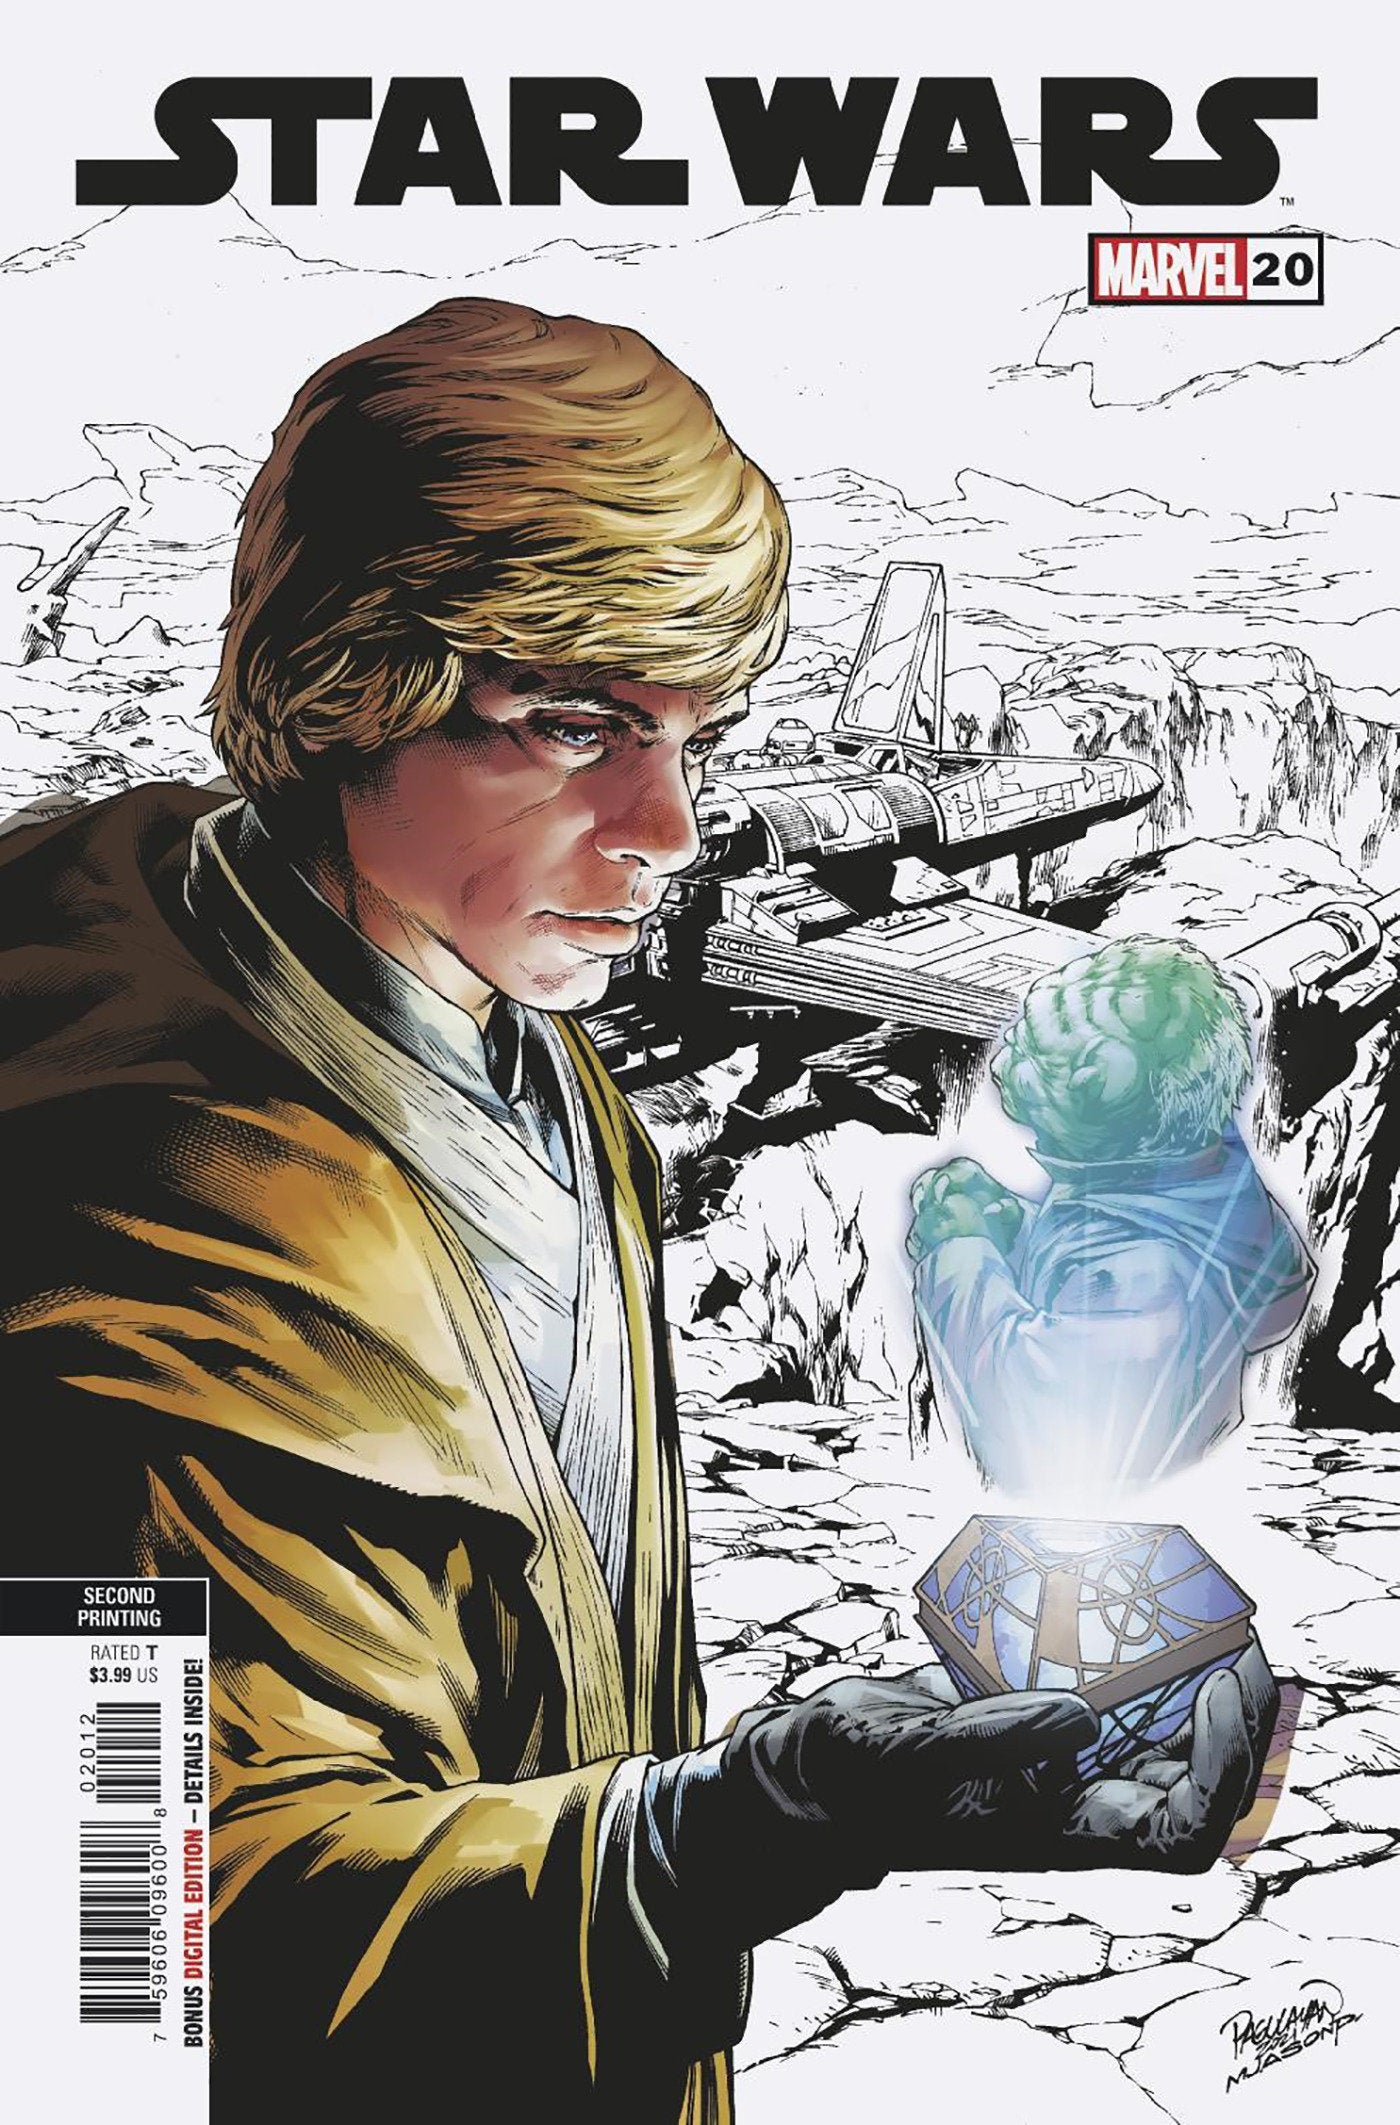 Image of Star Wars 20 Pagulayan 2Nd Printing Variant comic sold by Stronghold Collectibles.